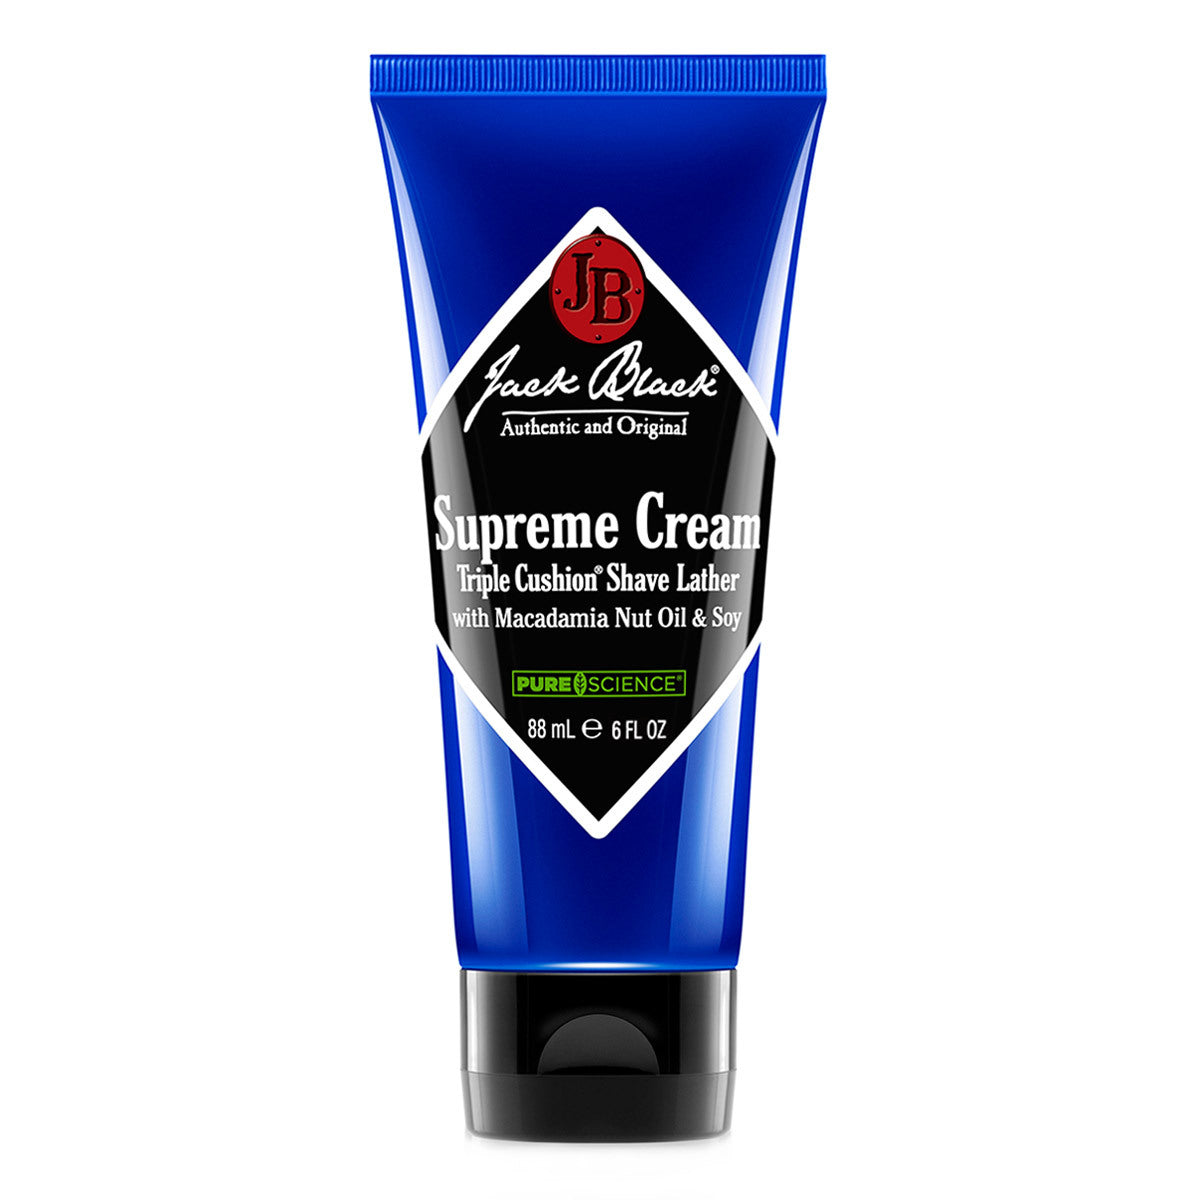 Primary image of Supreme Cream Triple Cushion Shave Lather